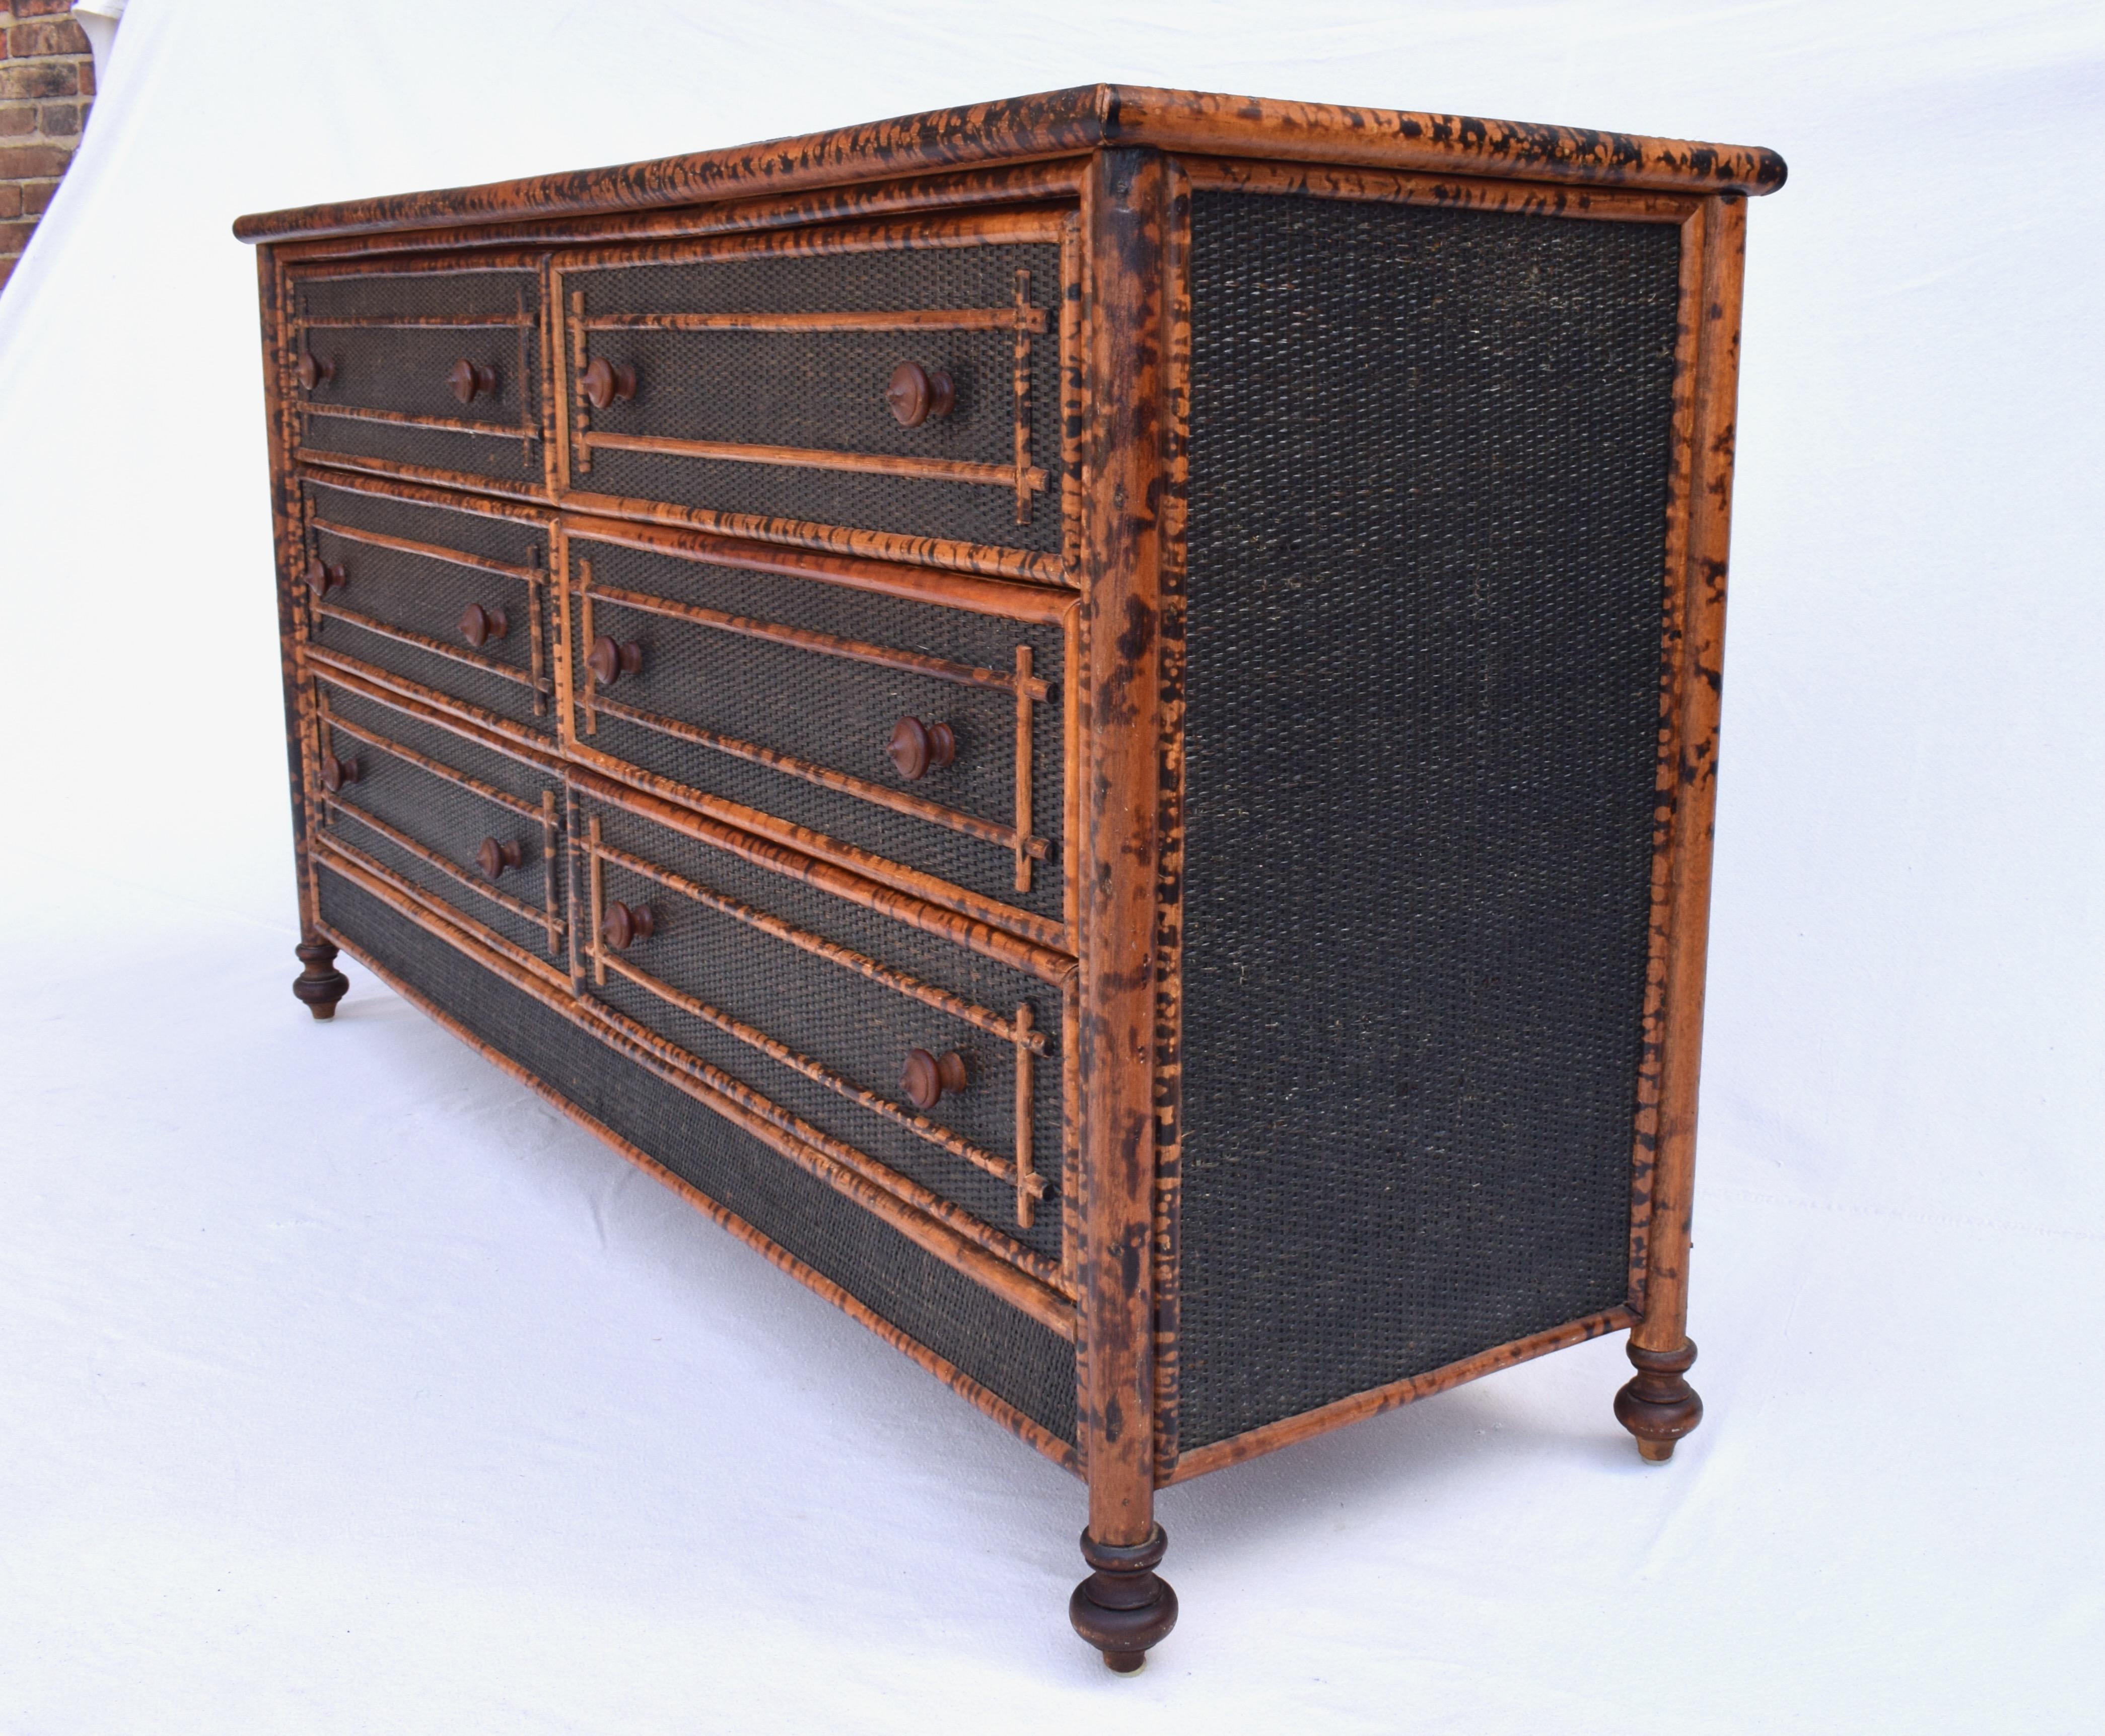 British Colonial style midcentury chest of six drawers covered in black grass cloth with striking burnt tortoise bamboo frame. An especially handsome piece featuring turned wood pulls and feet as seen in period British Colonial furniture. Ready for